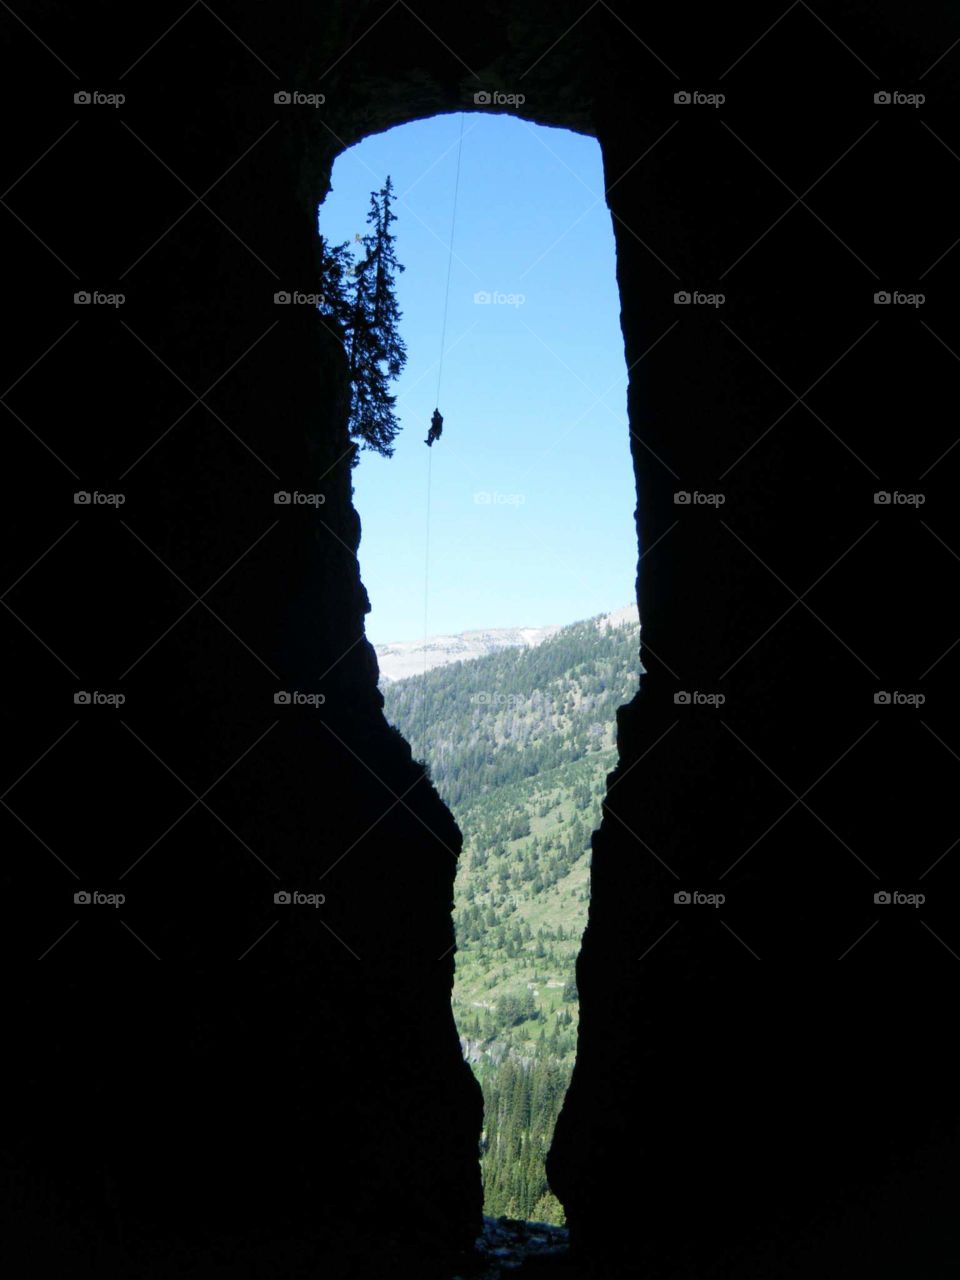 A free rappel of Darby Windcaves provided a feeling of freedom.